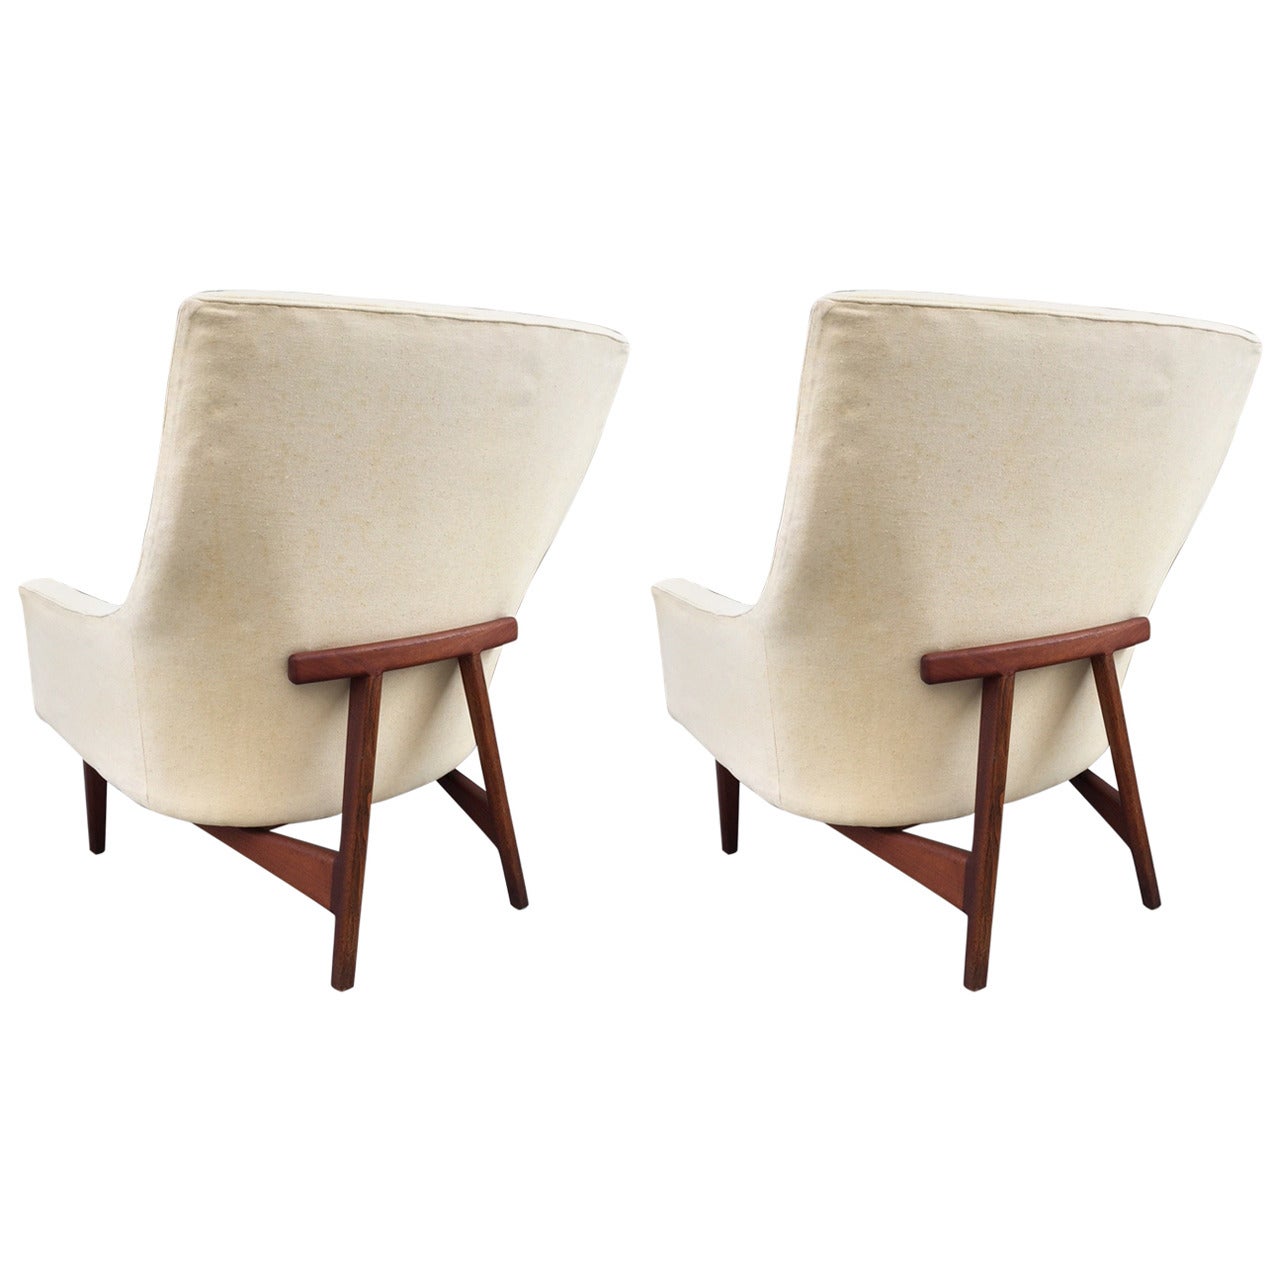 Pair of Lounge Chairs by Jens Risom No. 2136